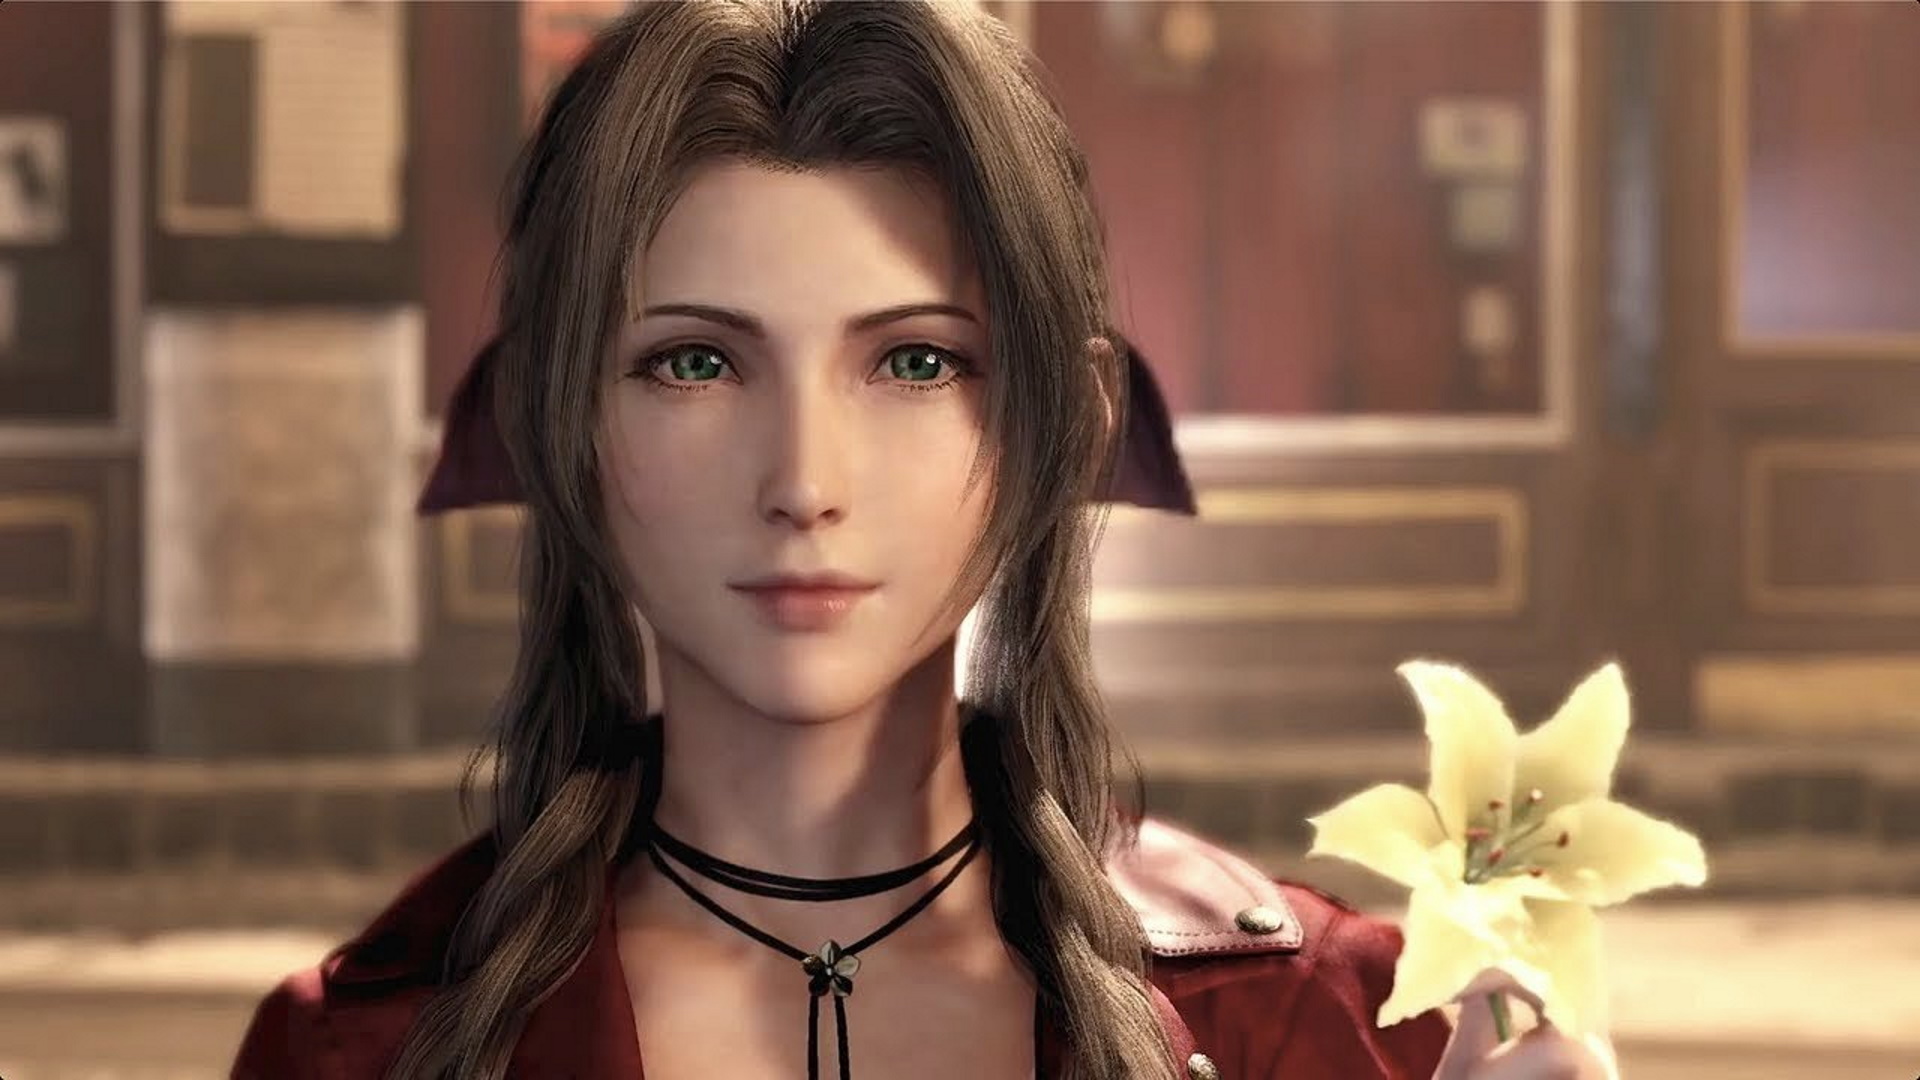 FF7 Remake on Steam is (almost) the most popular Final Fantasy game